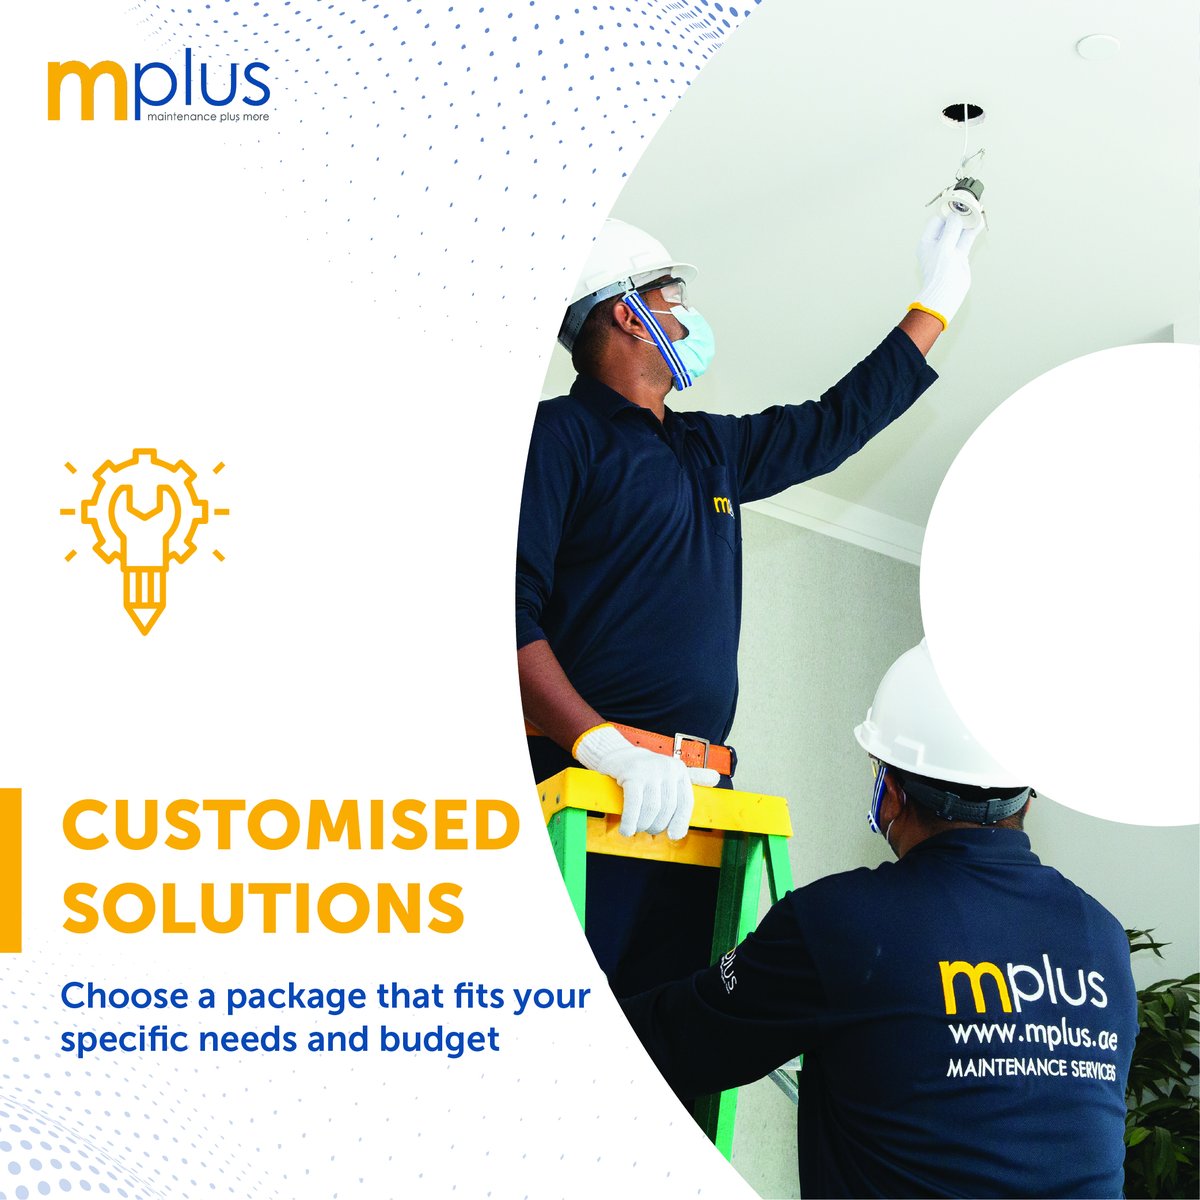 We offer a range of #propertymaintenance packages tailored to keep your home or office in prime condition year-round. Let #mplus the hassle out of home maintenance so you can enjoy more of what matters to you. 

Learn more or sign-up today: mplus.ae/packages